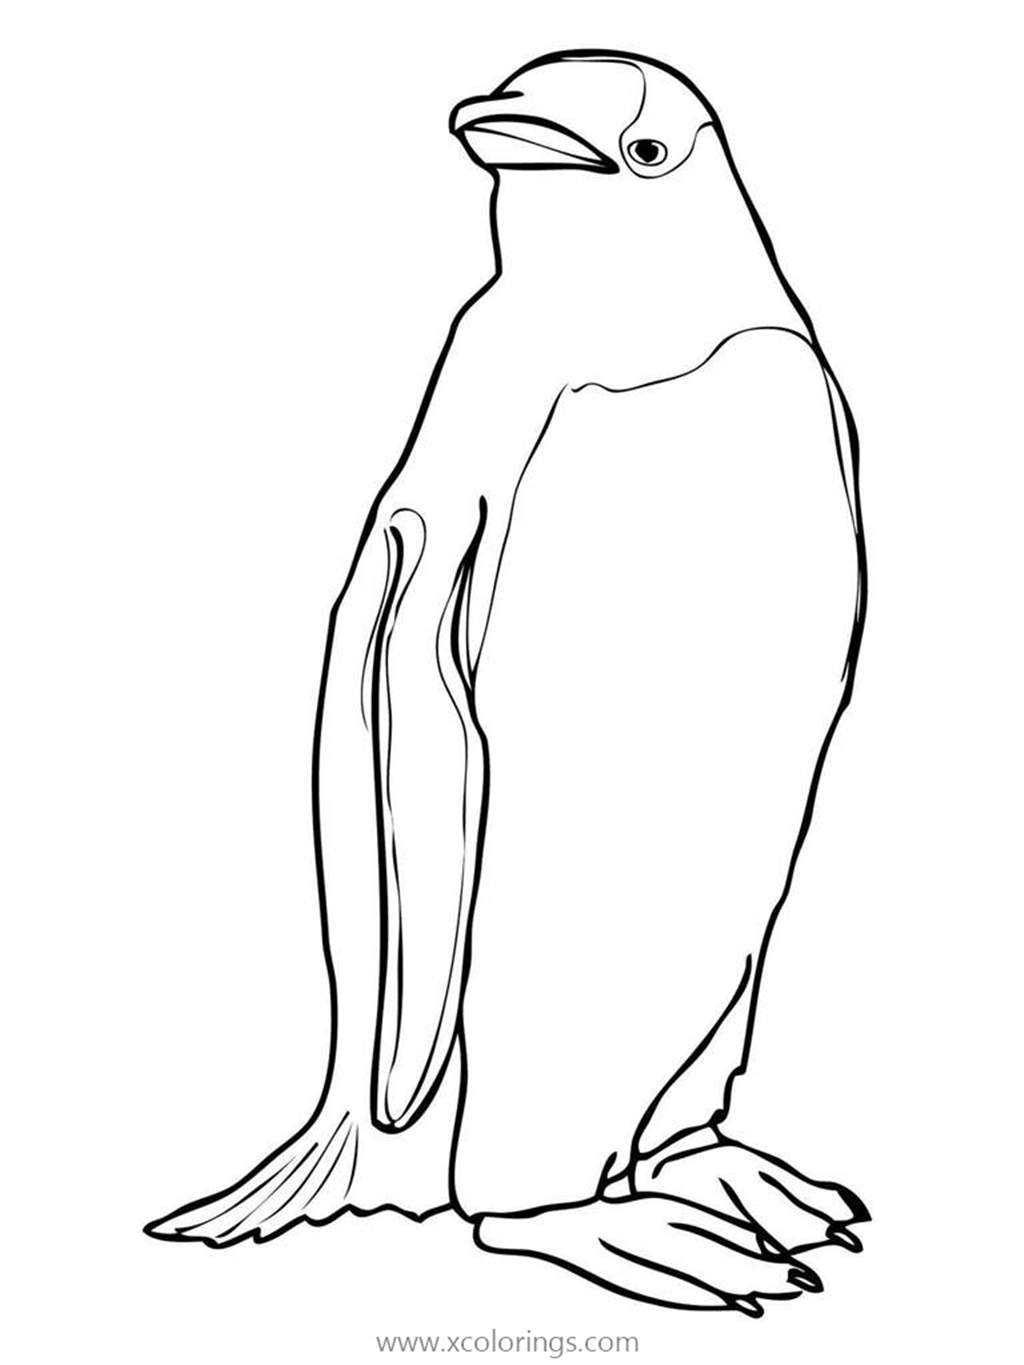 Free Polar Animals Gentoo Penguin Coloring Pages printable